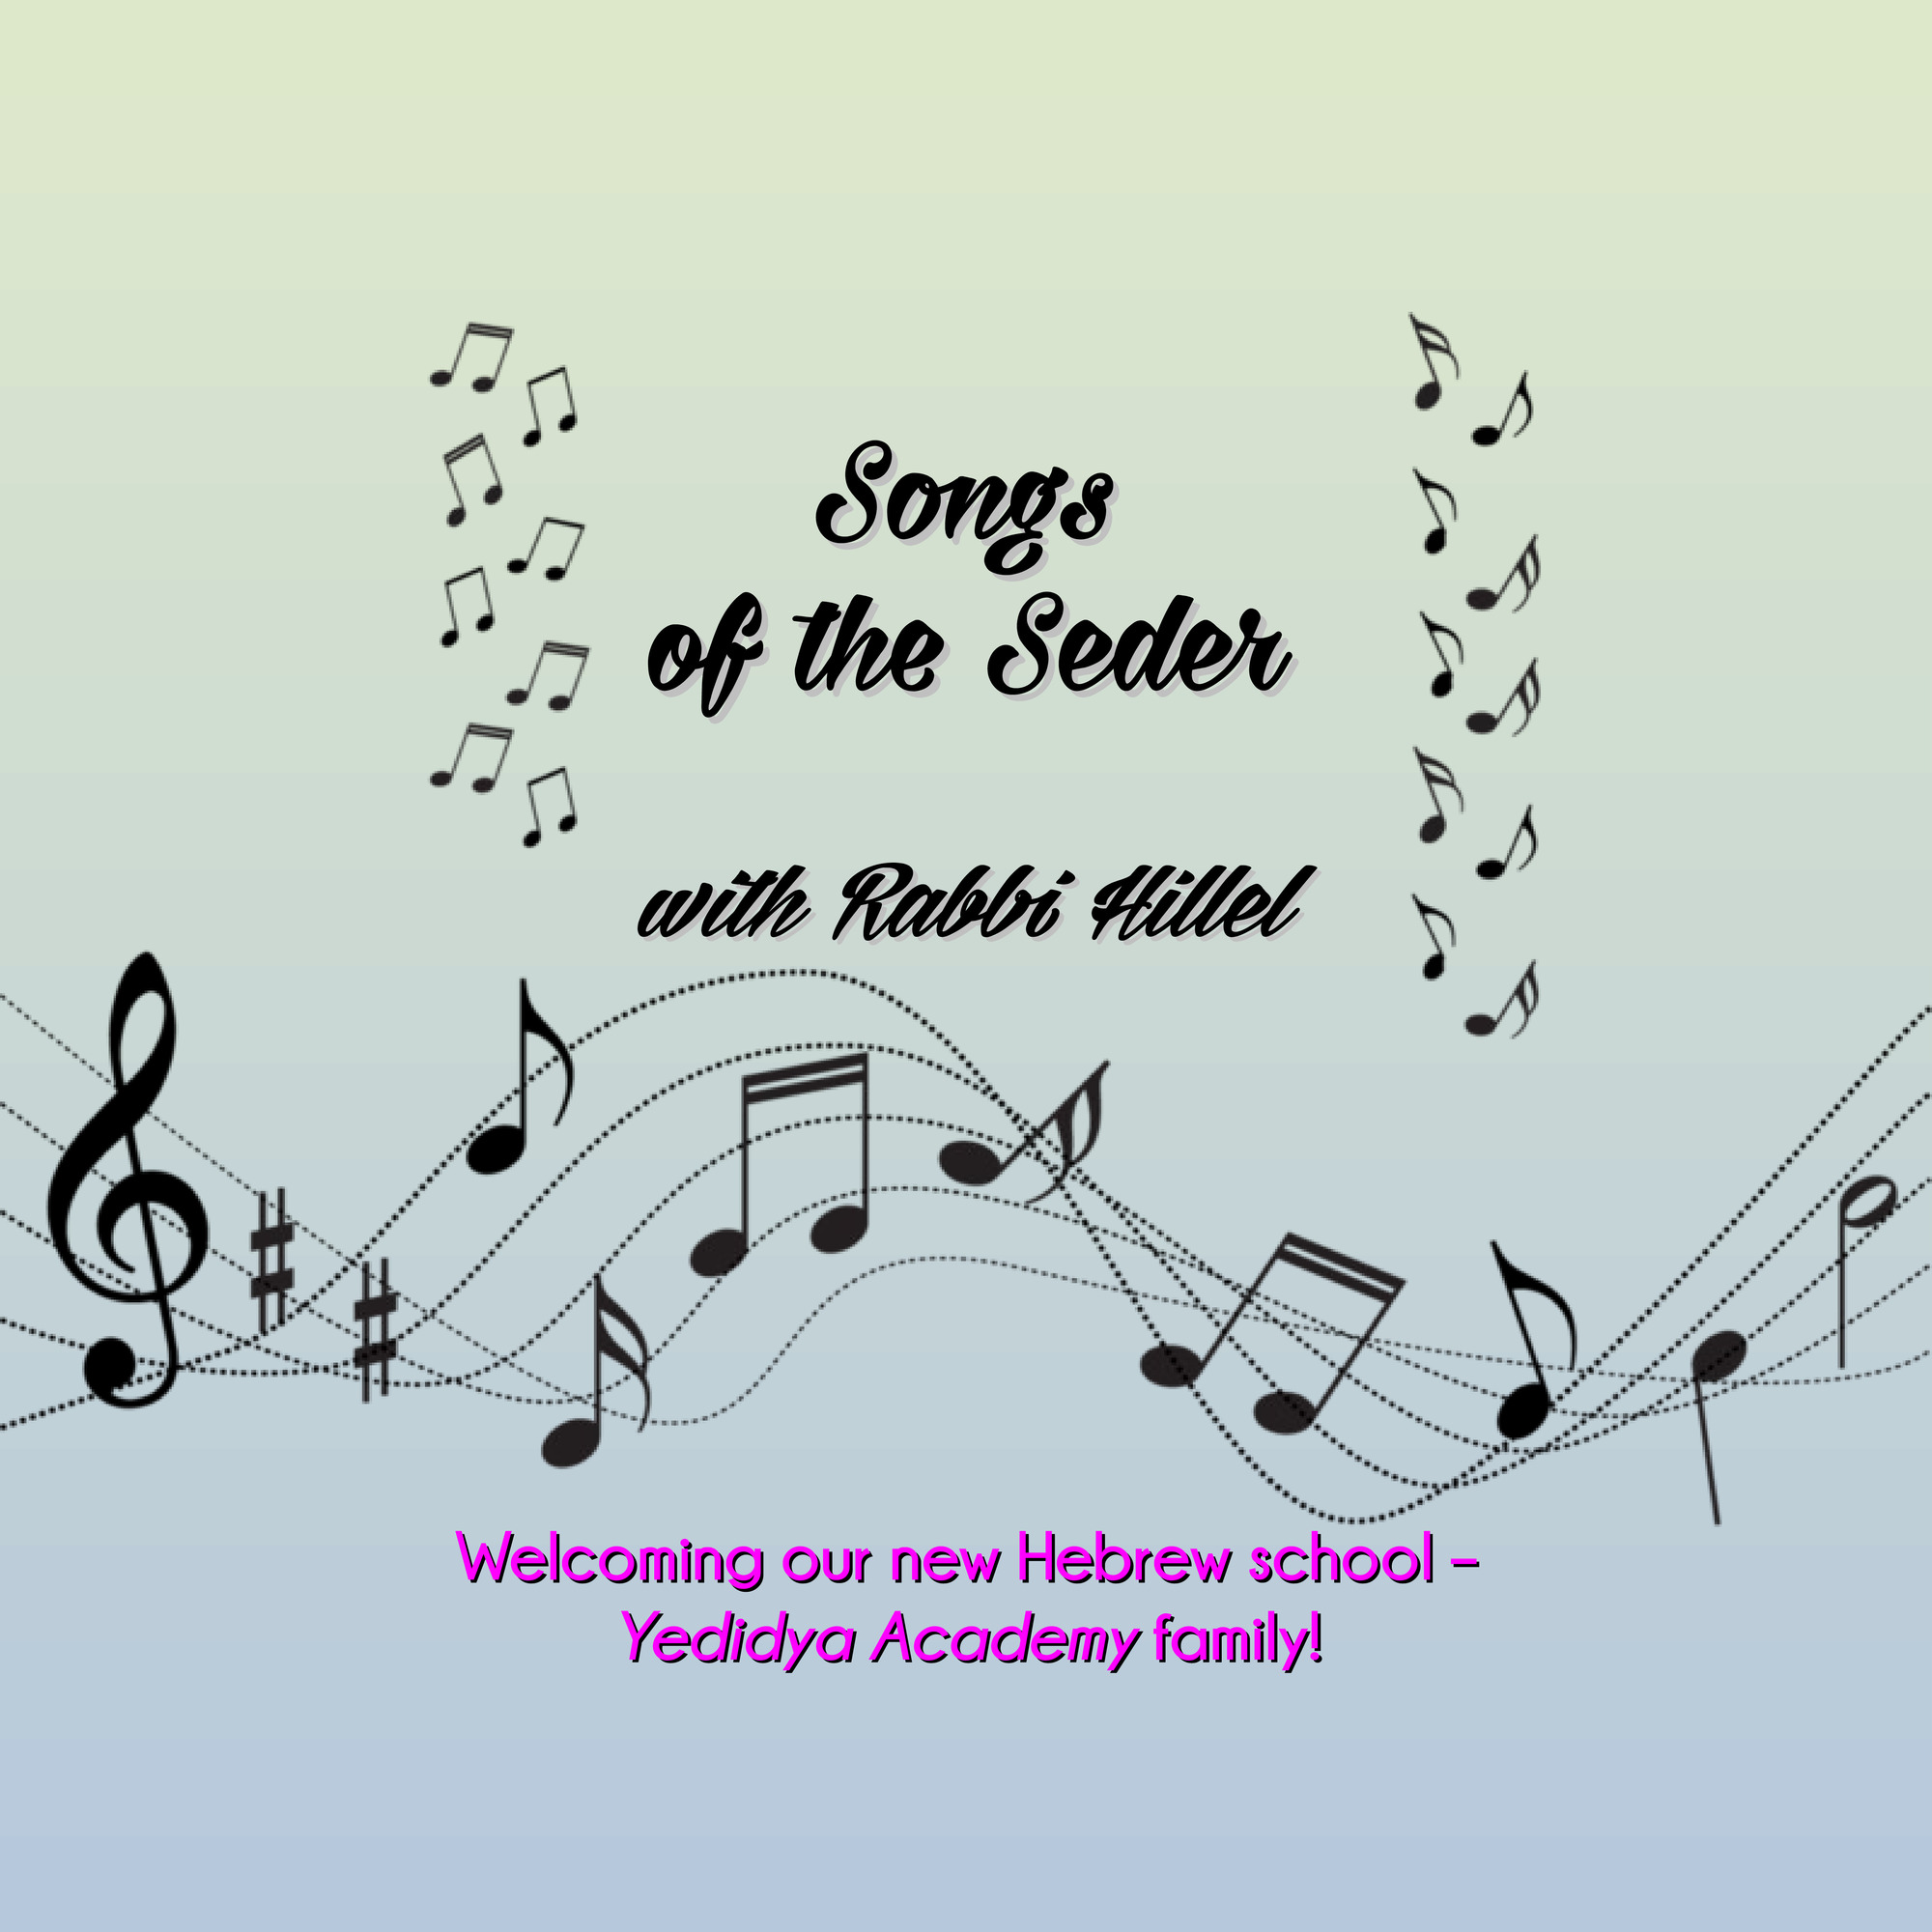 Songs of the Seder with Rabbi Hillel